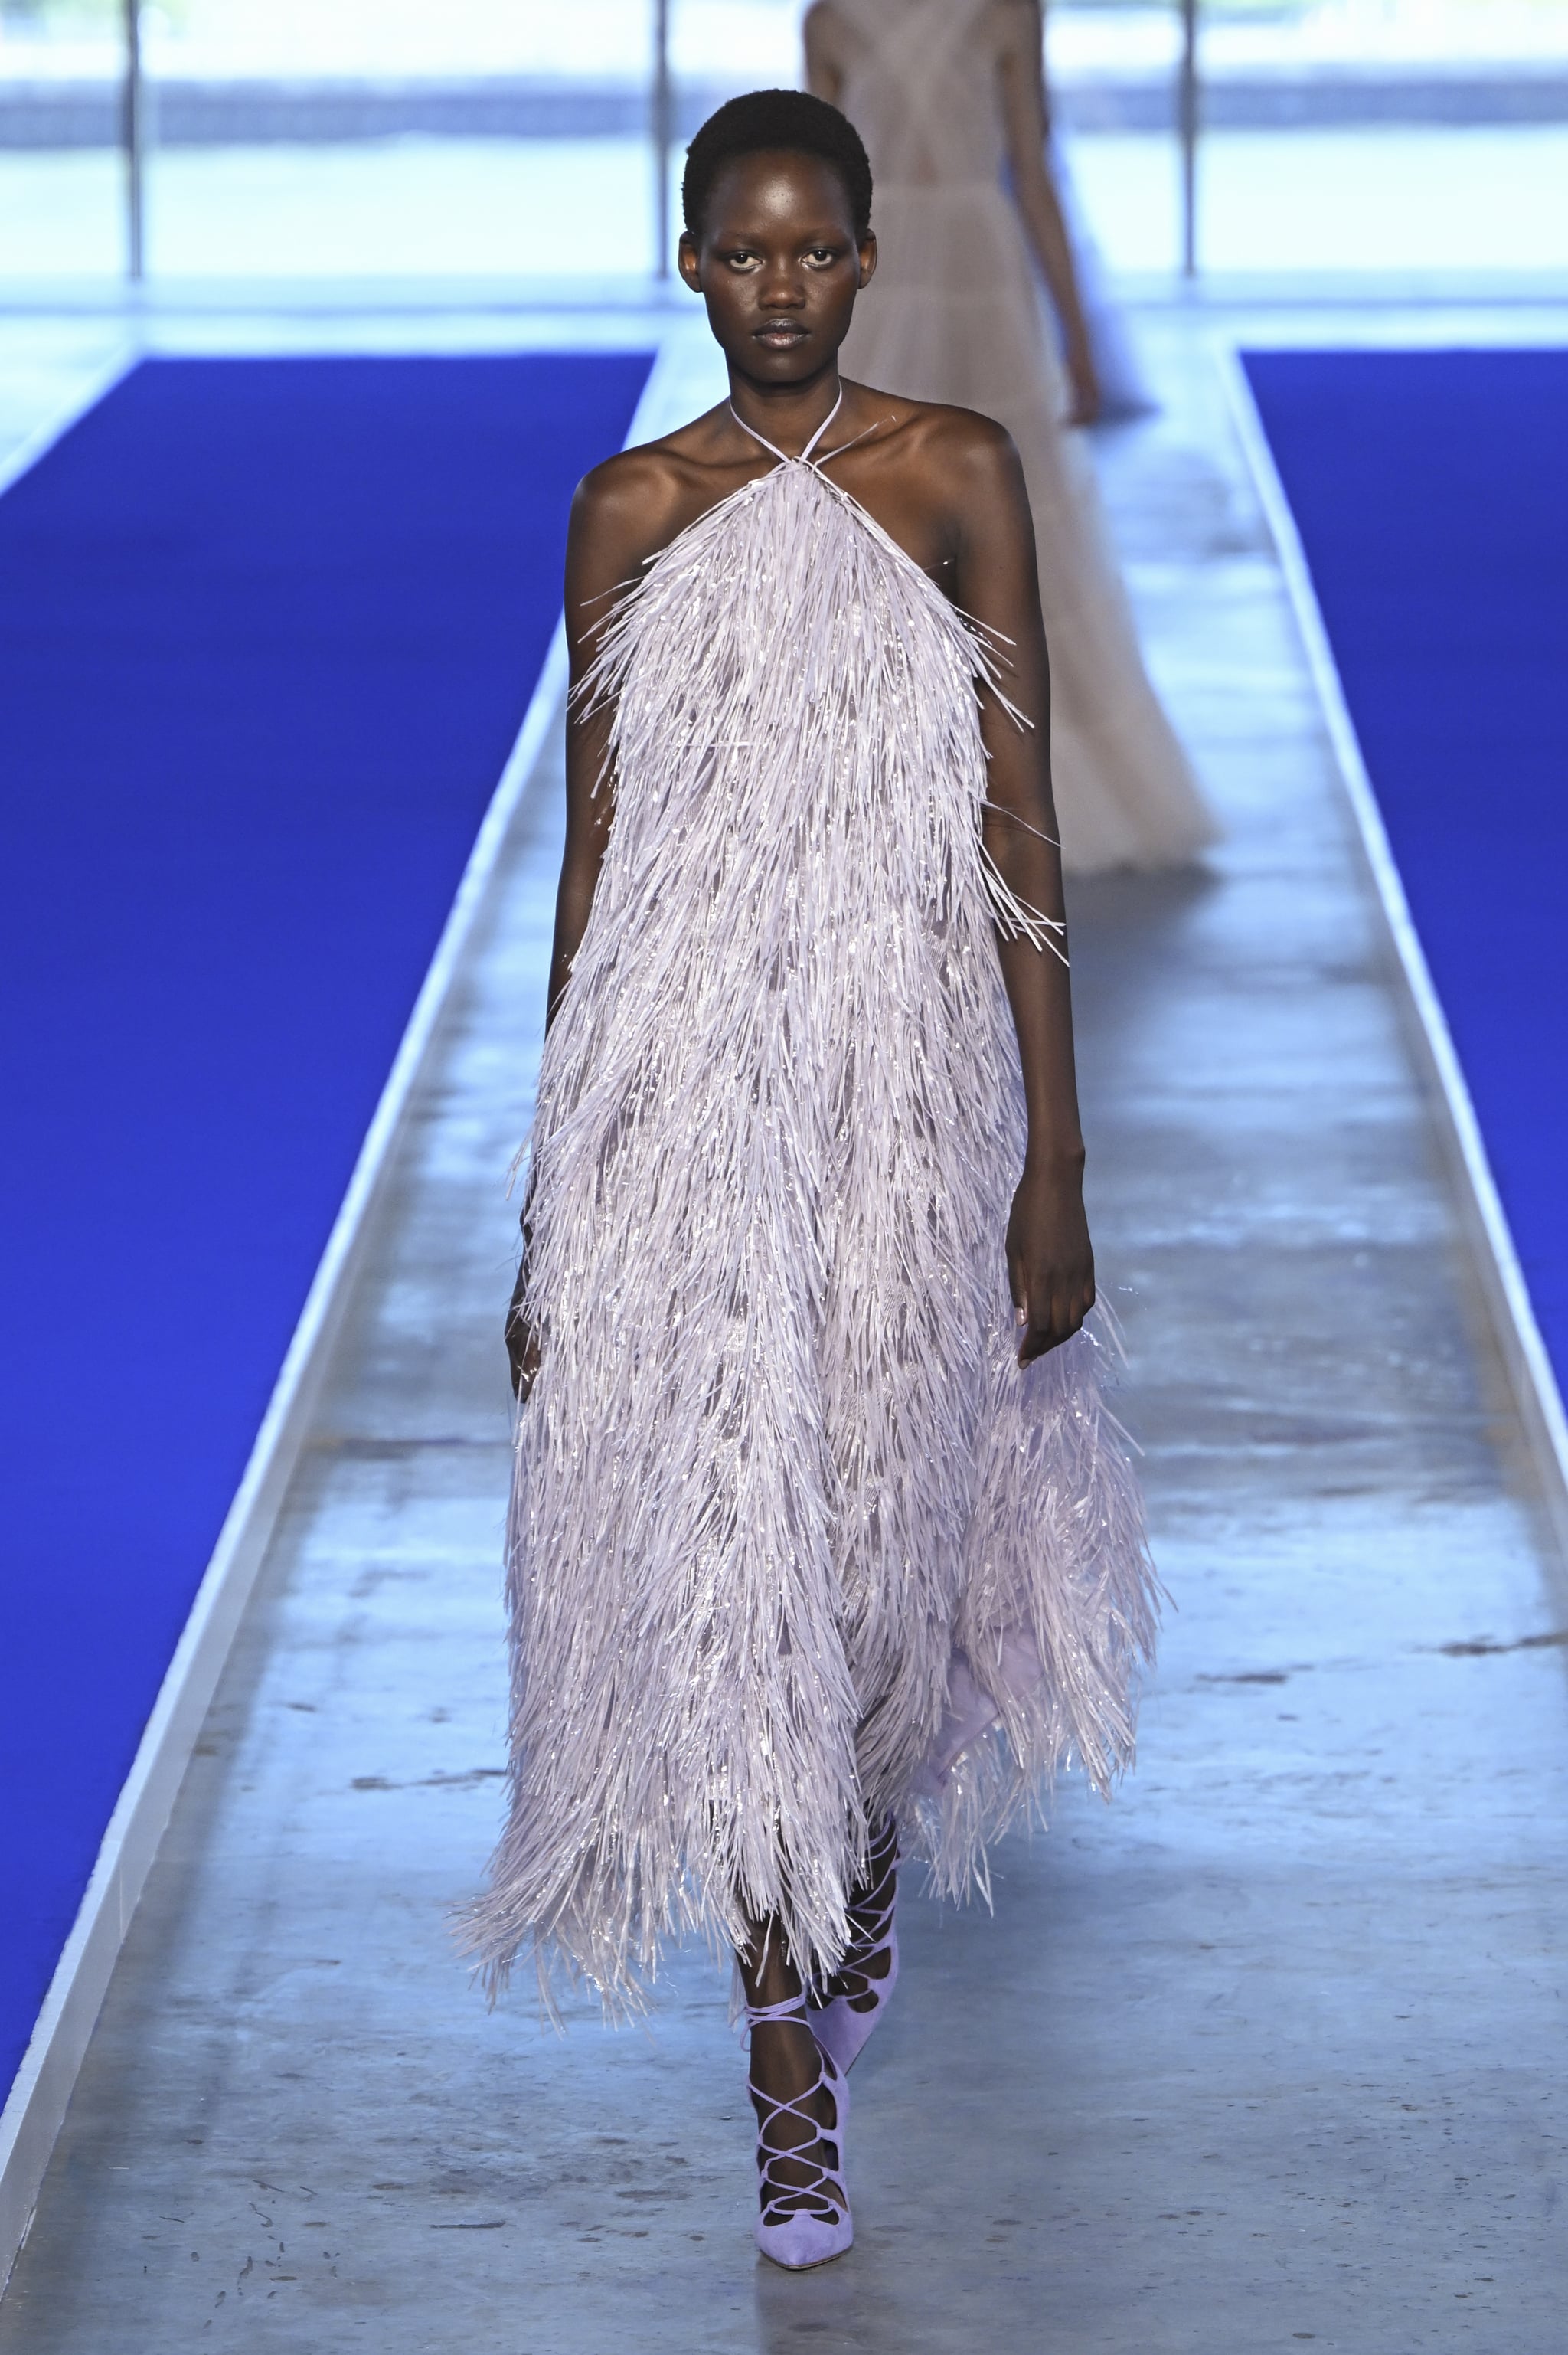 The 10 Key Spring/Summer 2023 Trends To Know Now